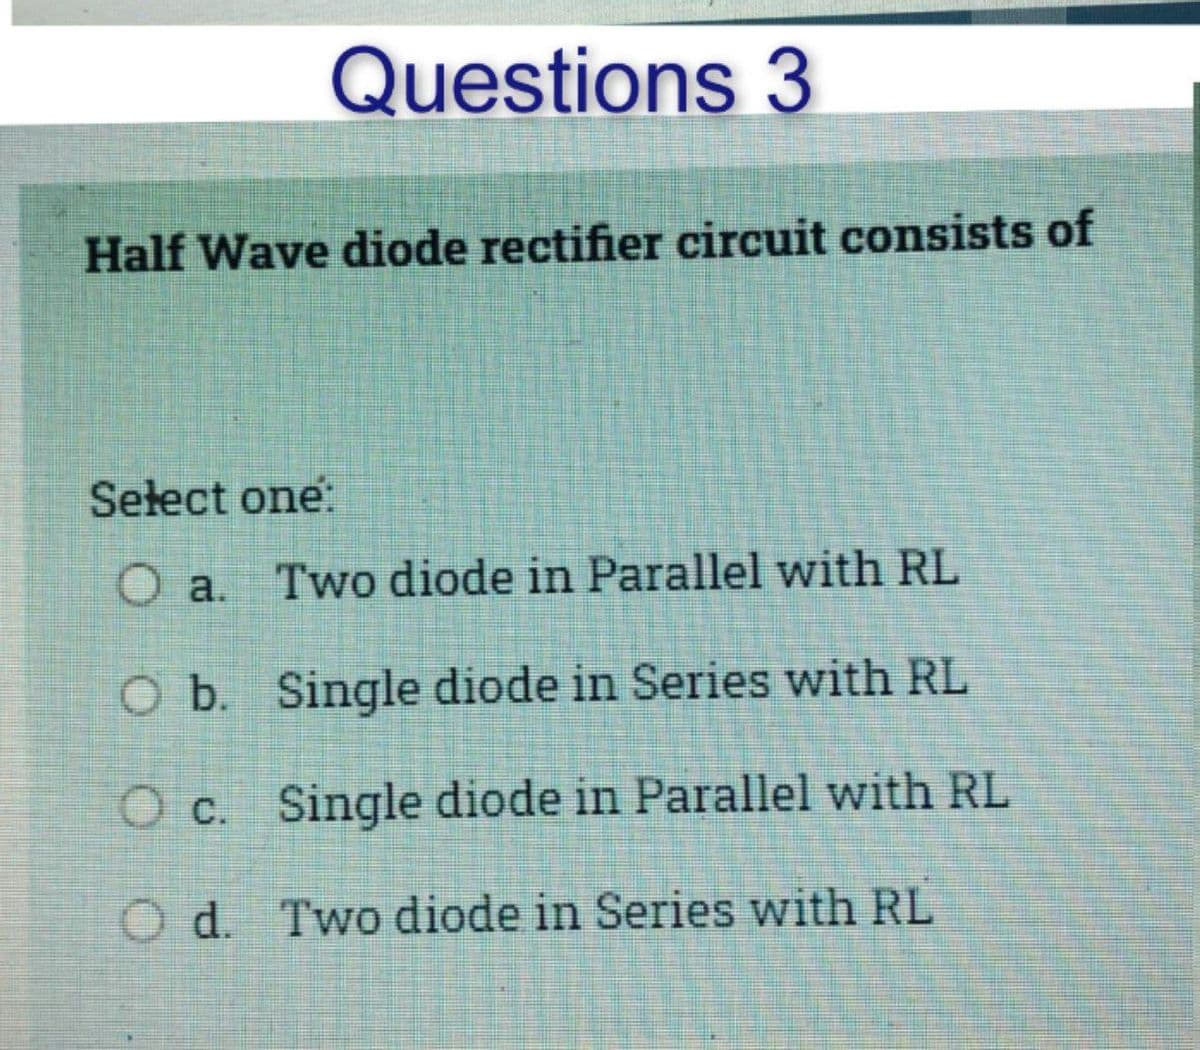 Questions 3
Half Wave diode rectifier circuit consists of
Select one:
O a. Two diode in Parallel with RL
O b. Single diode in Series with RL
O c.
Single diode in Parallel with RL
Od.
Two diode in
Series with RL
S
P
PESA
S